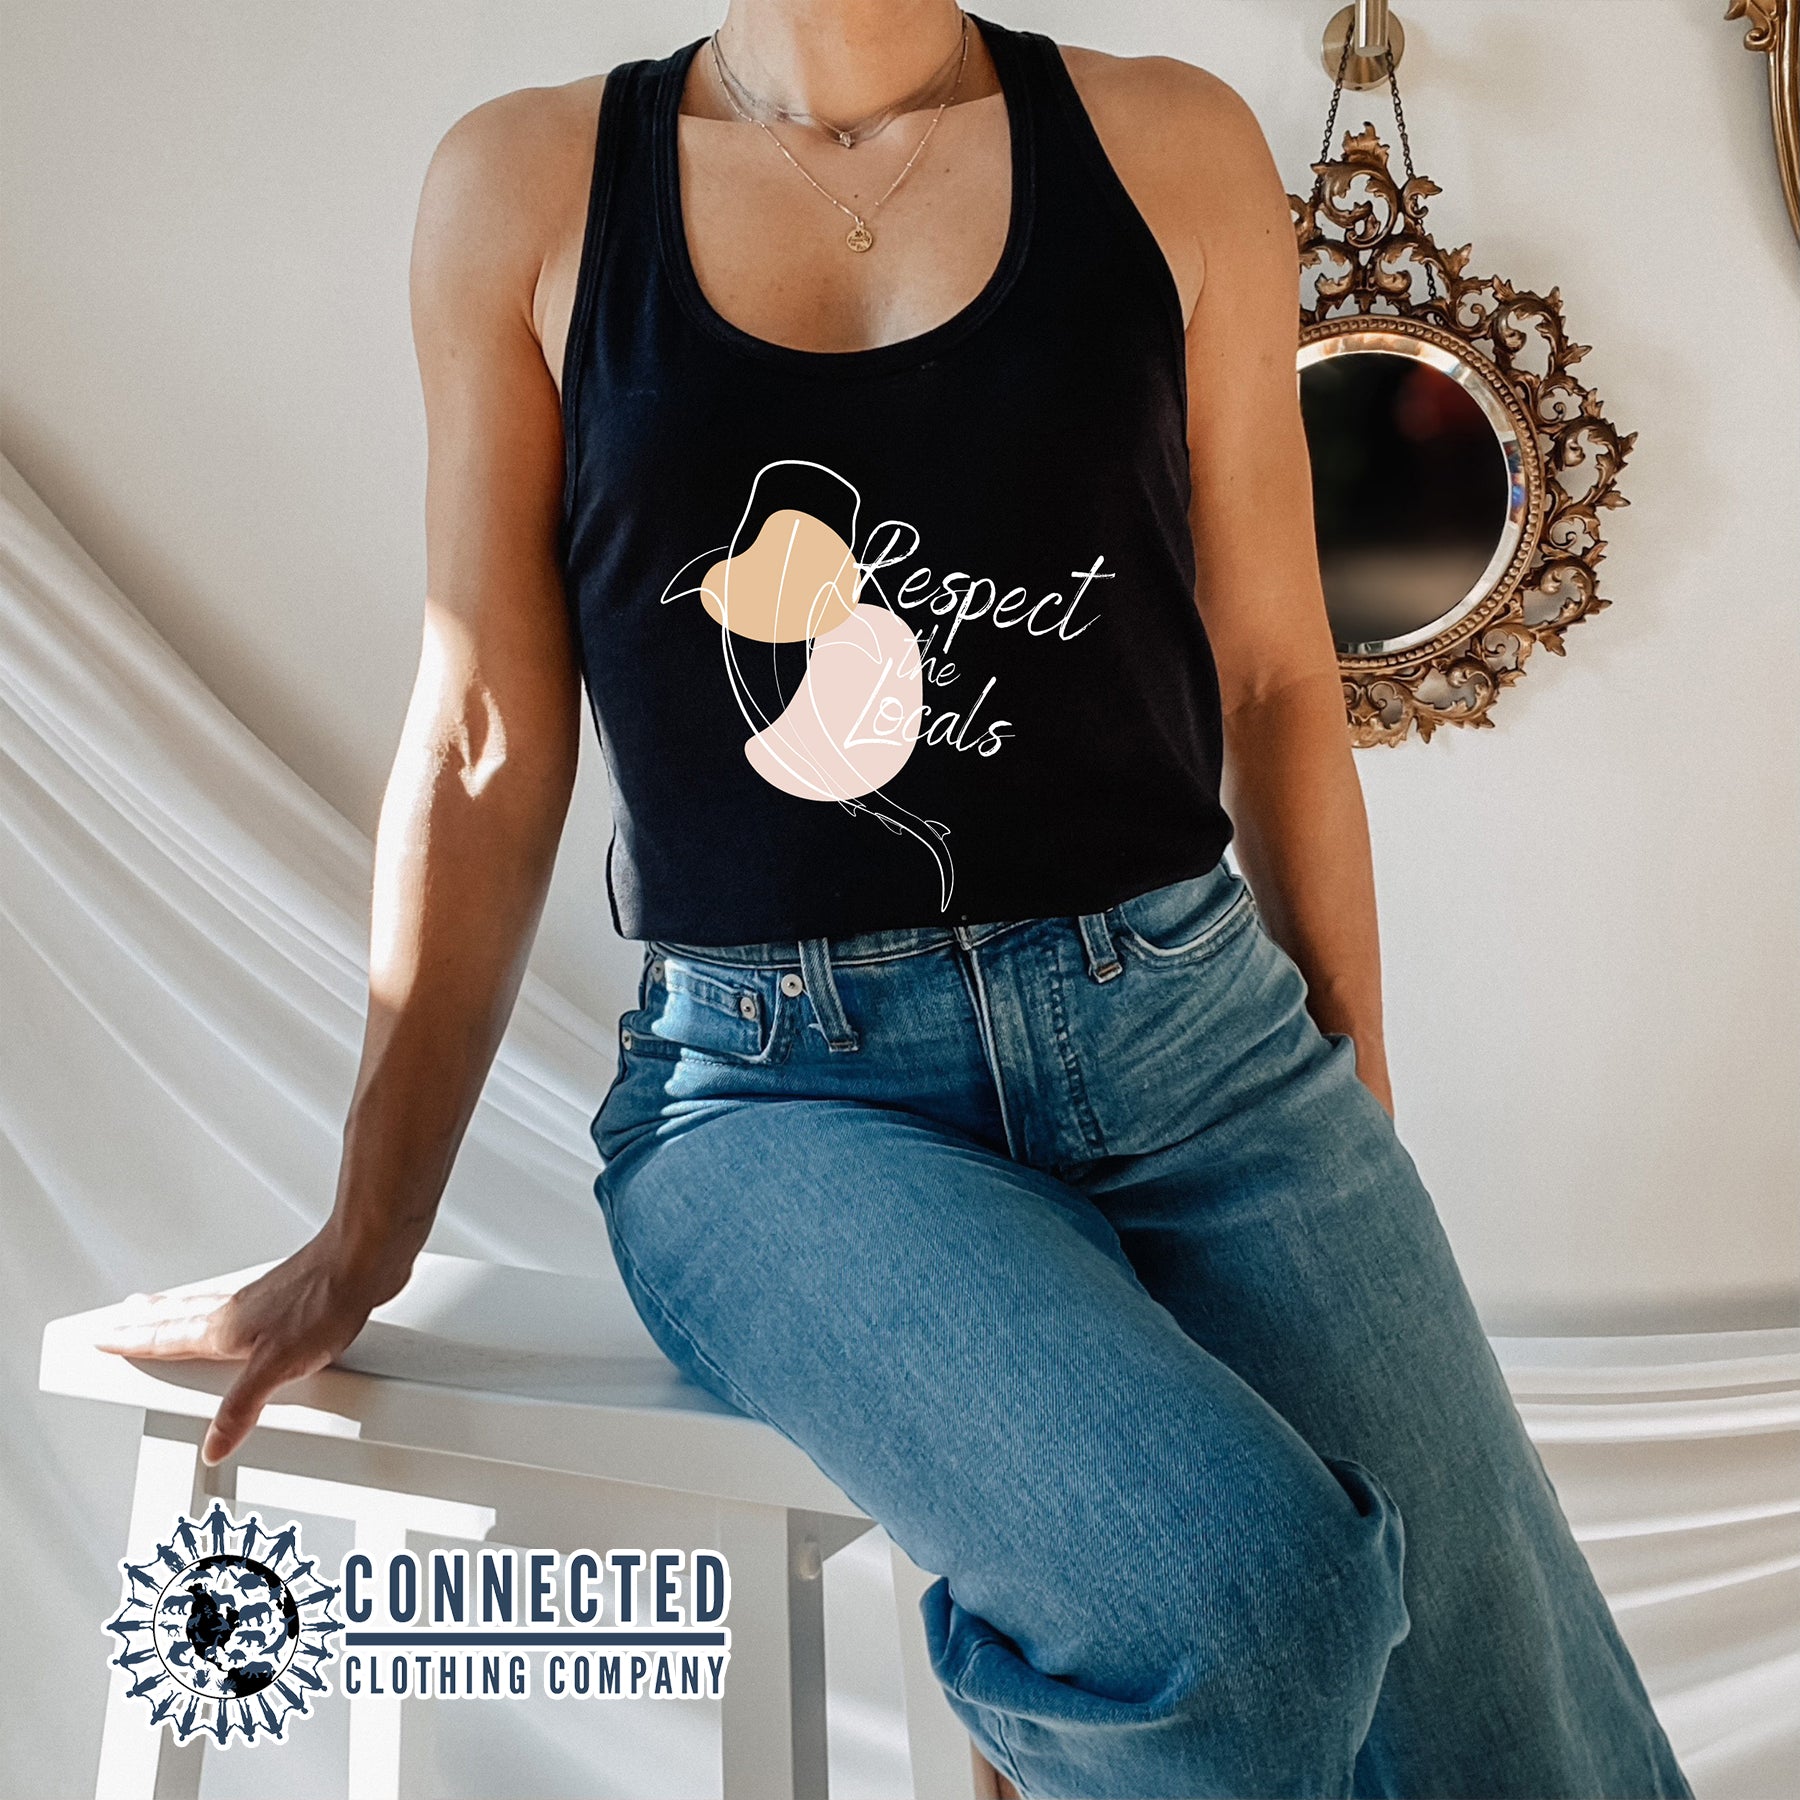 Black Respect The Locals Whale Shark Tank Top - Connected Clothing Company - 10% of proceeds are donated to ocean conservation